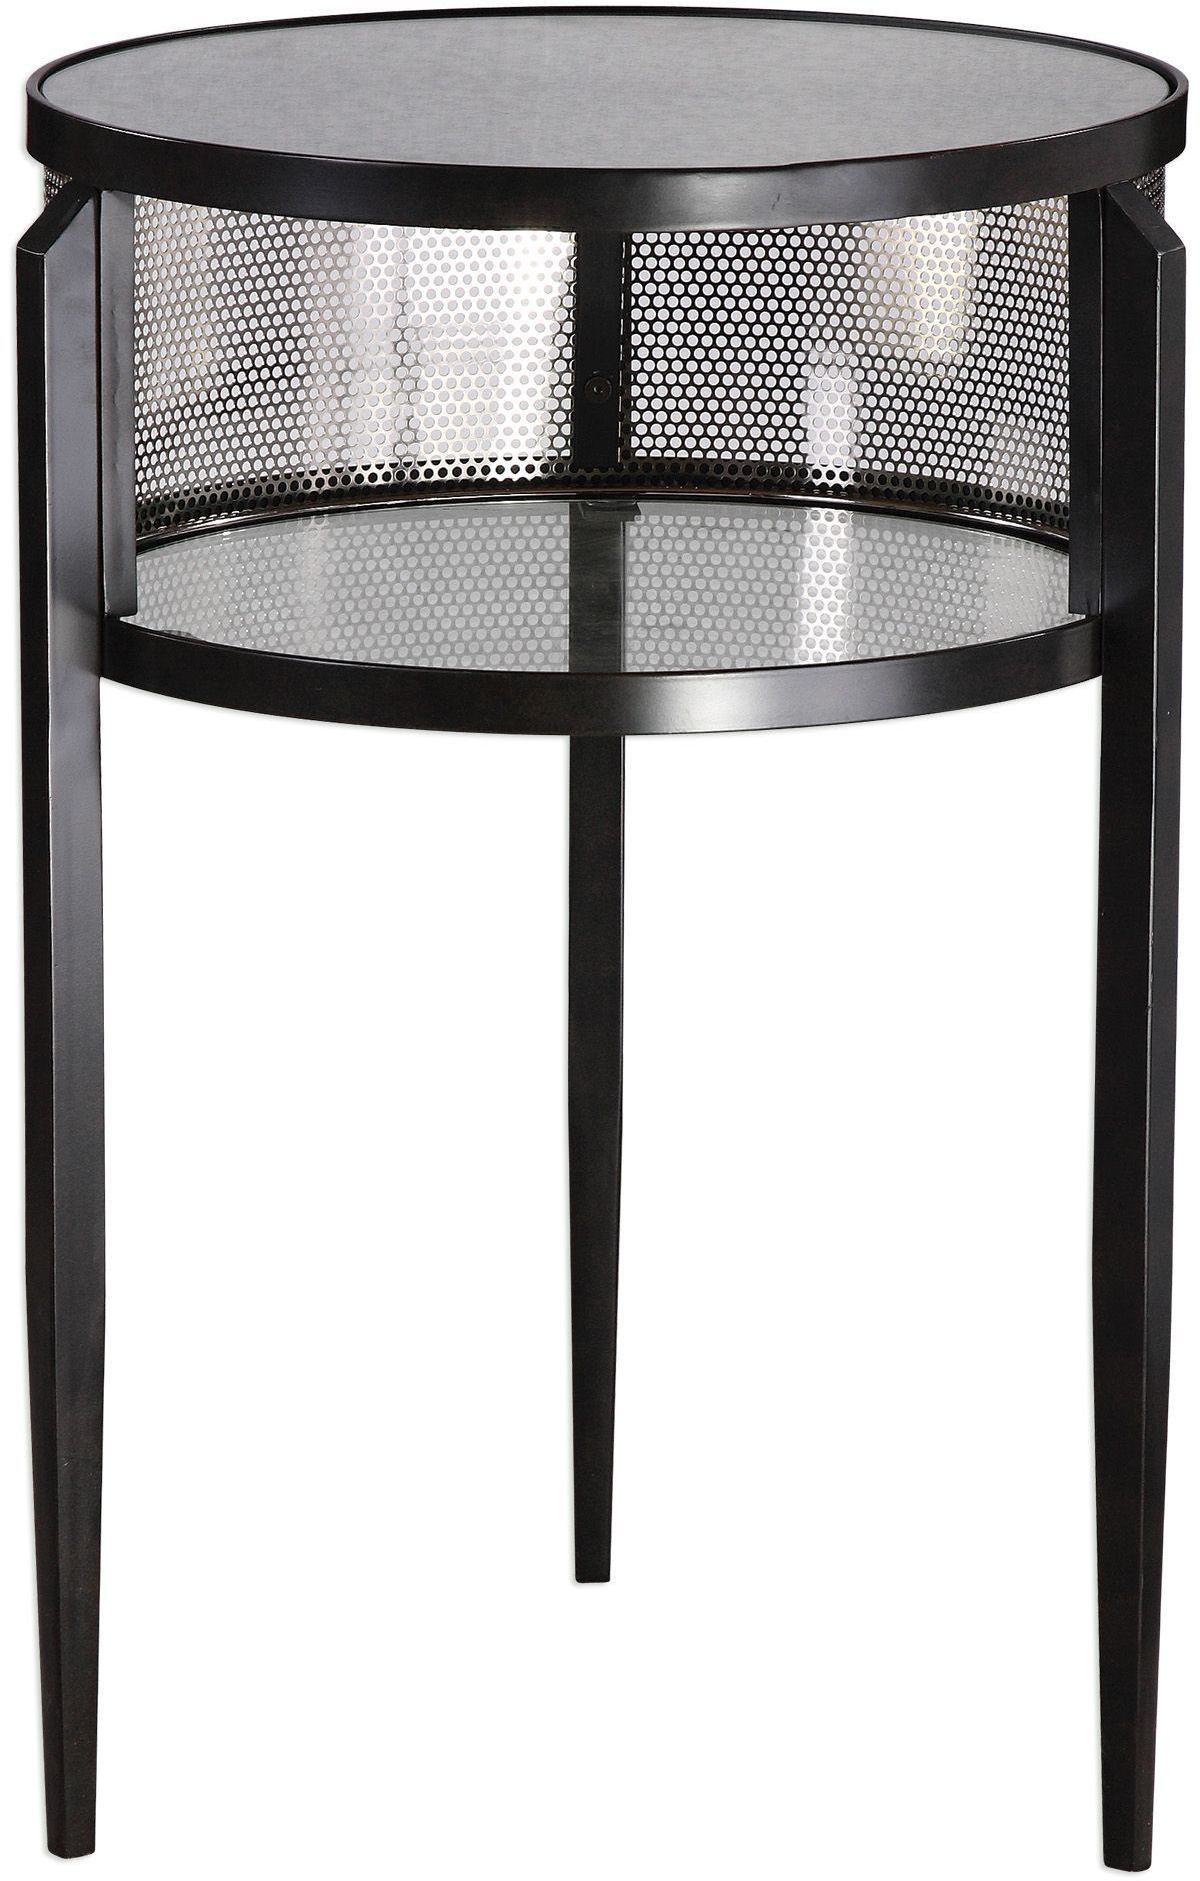 this drum style accent table finished aged black iron with end tables slim tapered legs phone charging furniture small drinks fridge kmart dining country cottage decor ethan allen